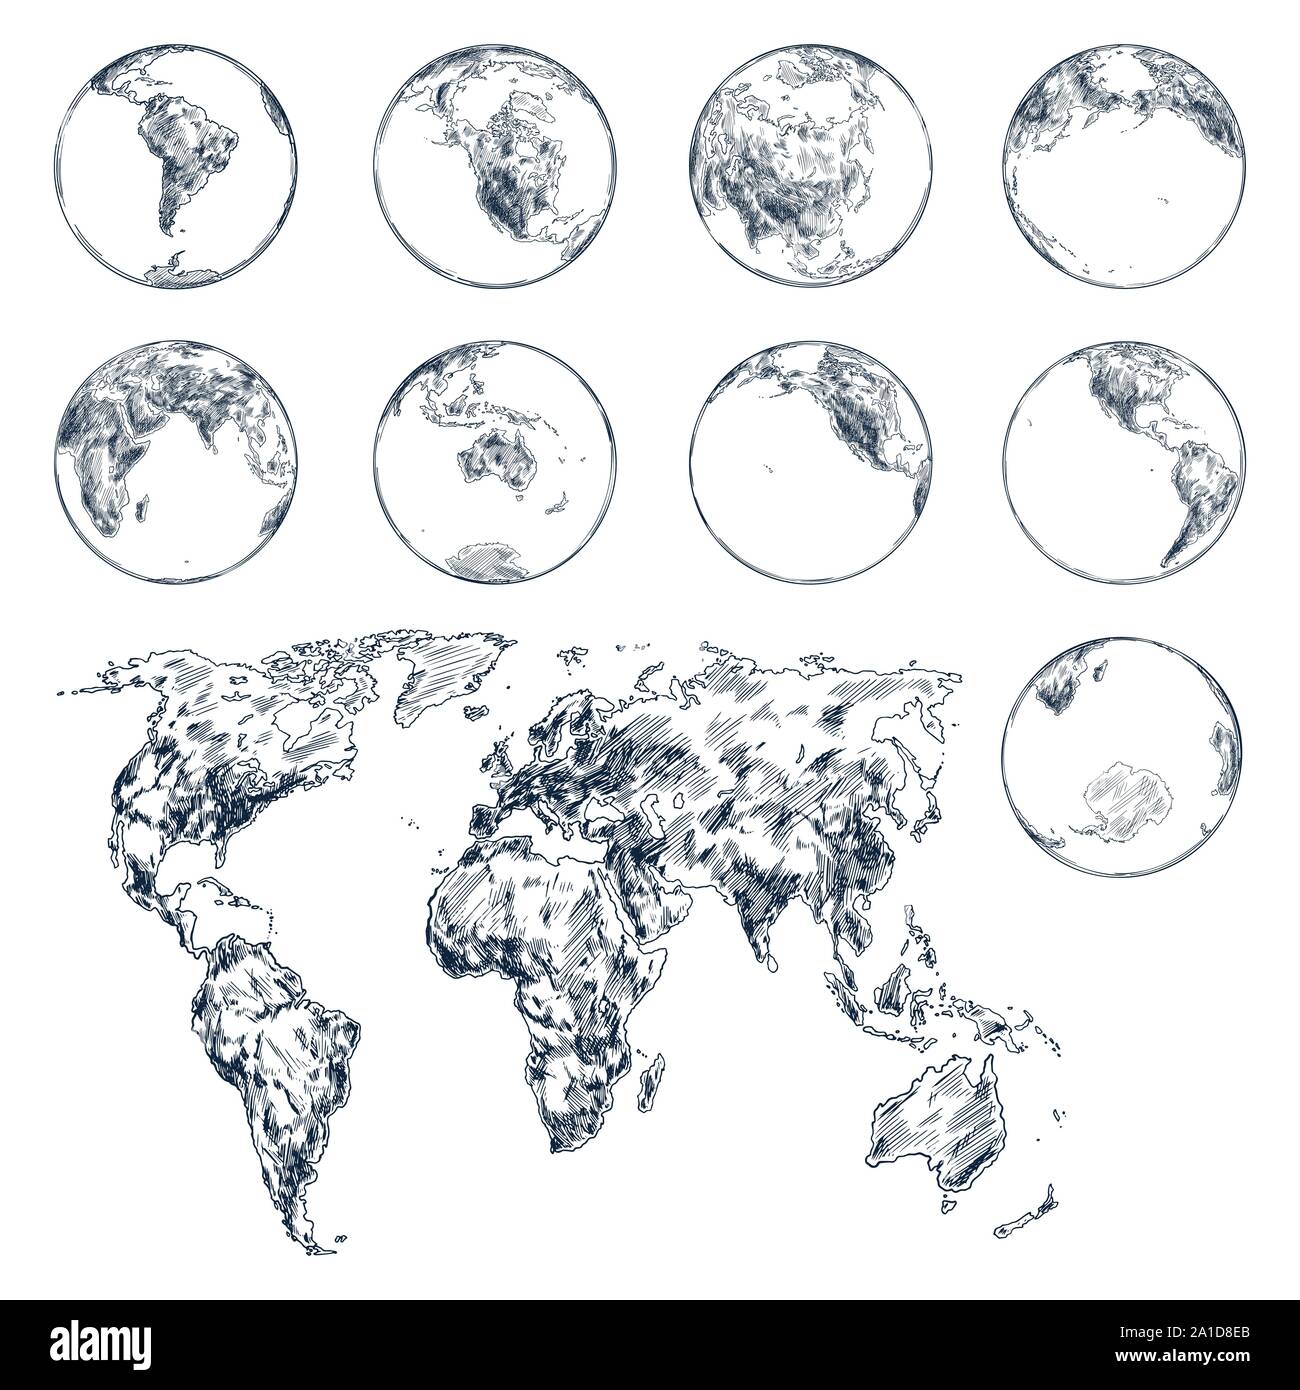 Sketch of earth planet continents. World map Stock Vector